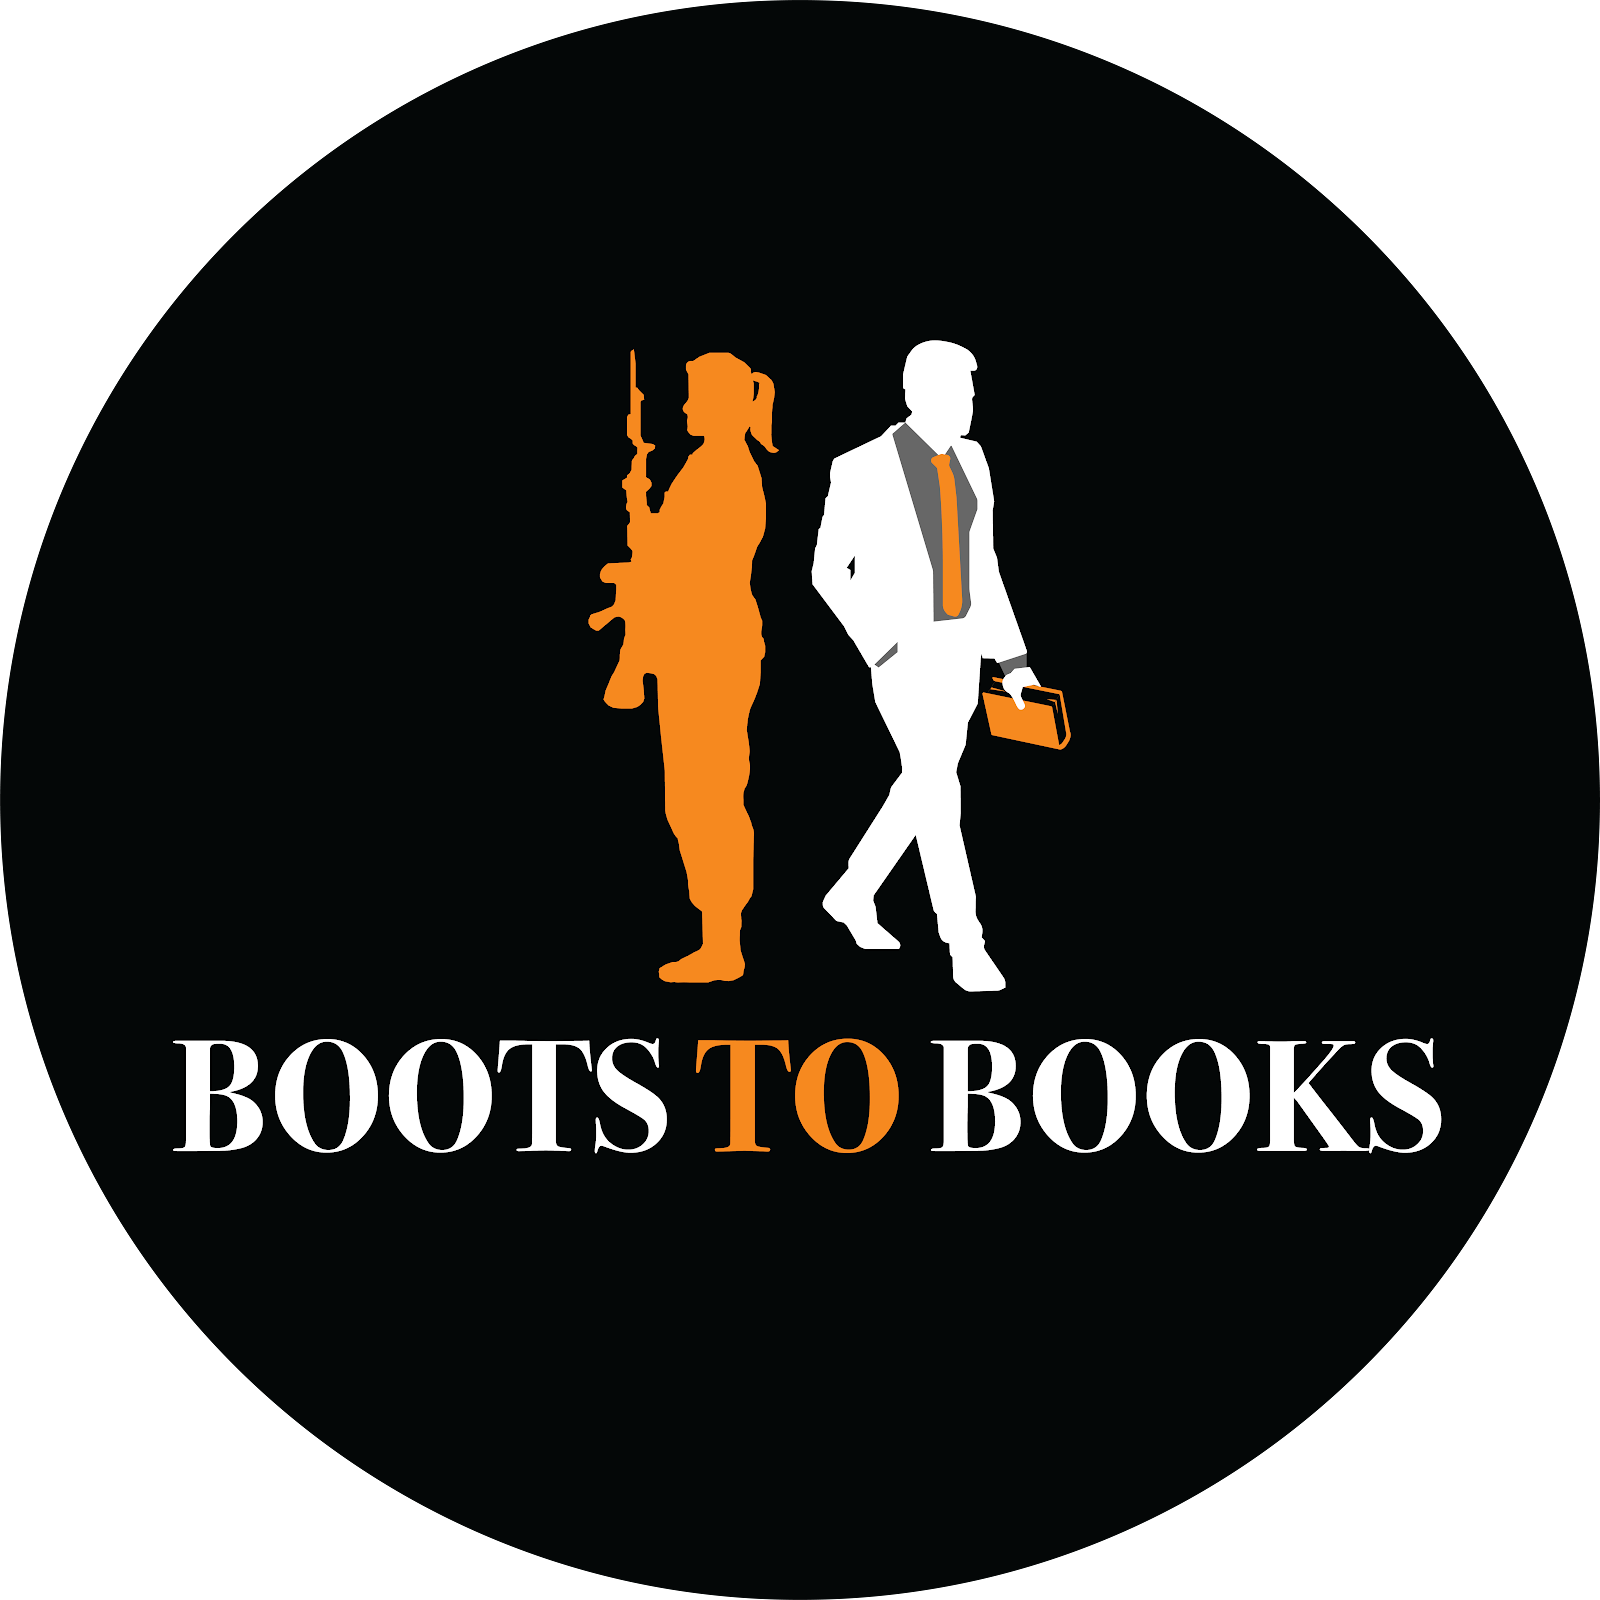 Boots to Books Partnership with GRE